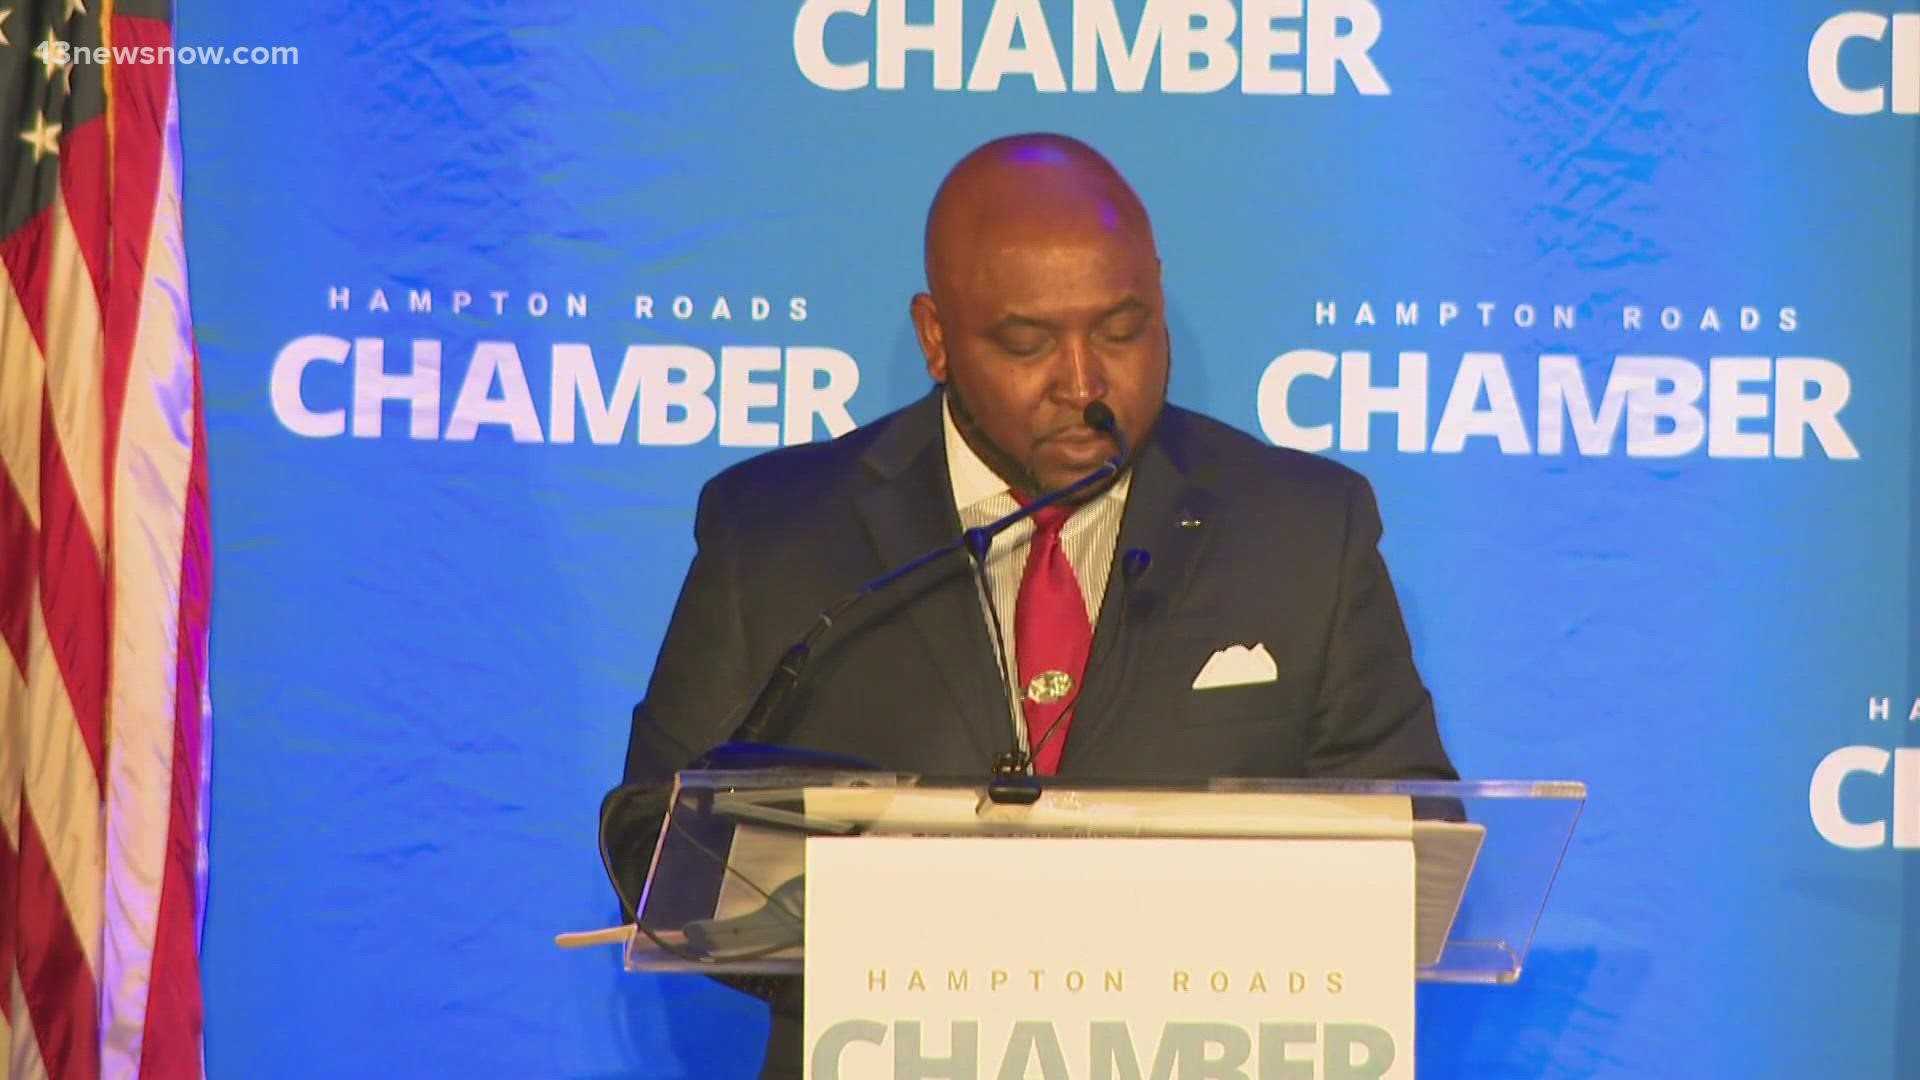 Mayor Shannon Glover encouraged people to get involved with their communities, whether it's volunteering with a nonprofit, or donating money to a community program.